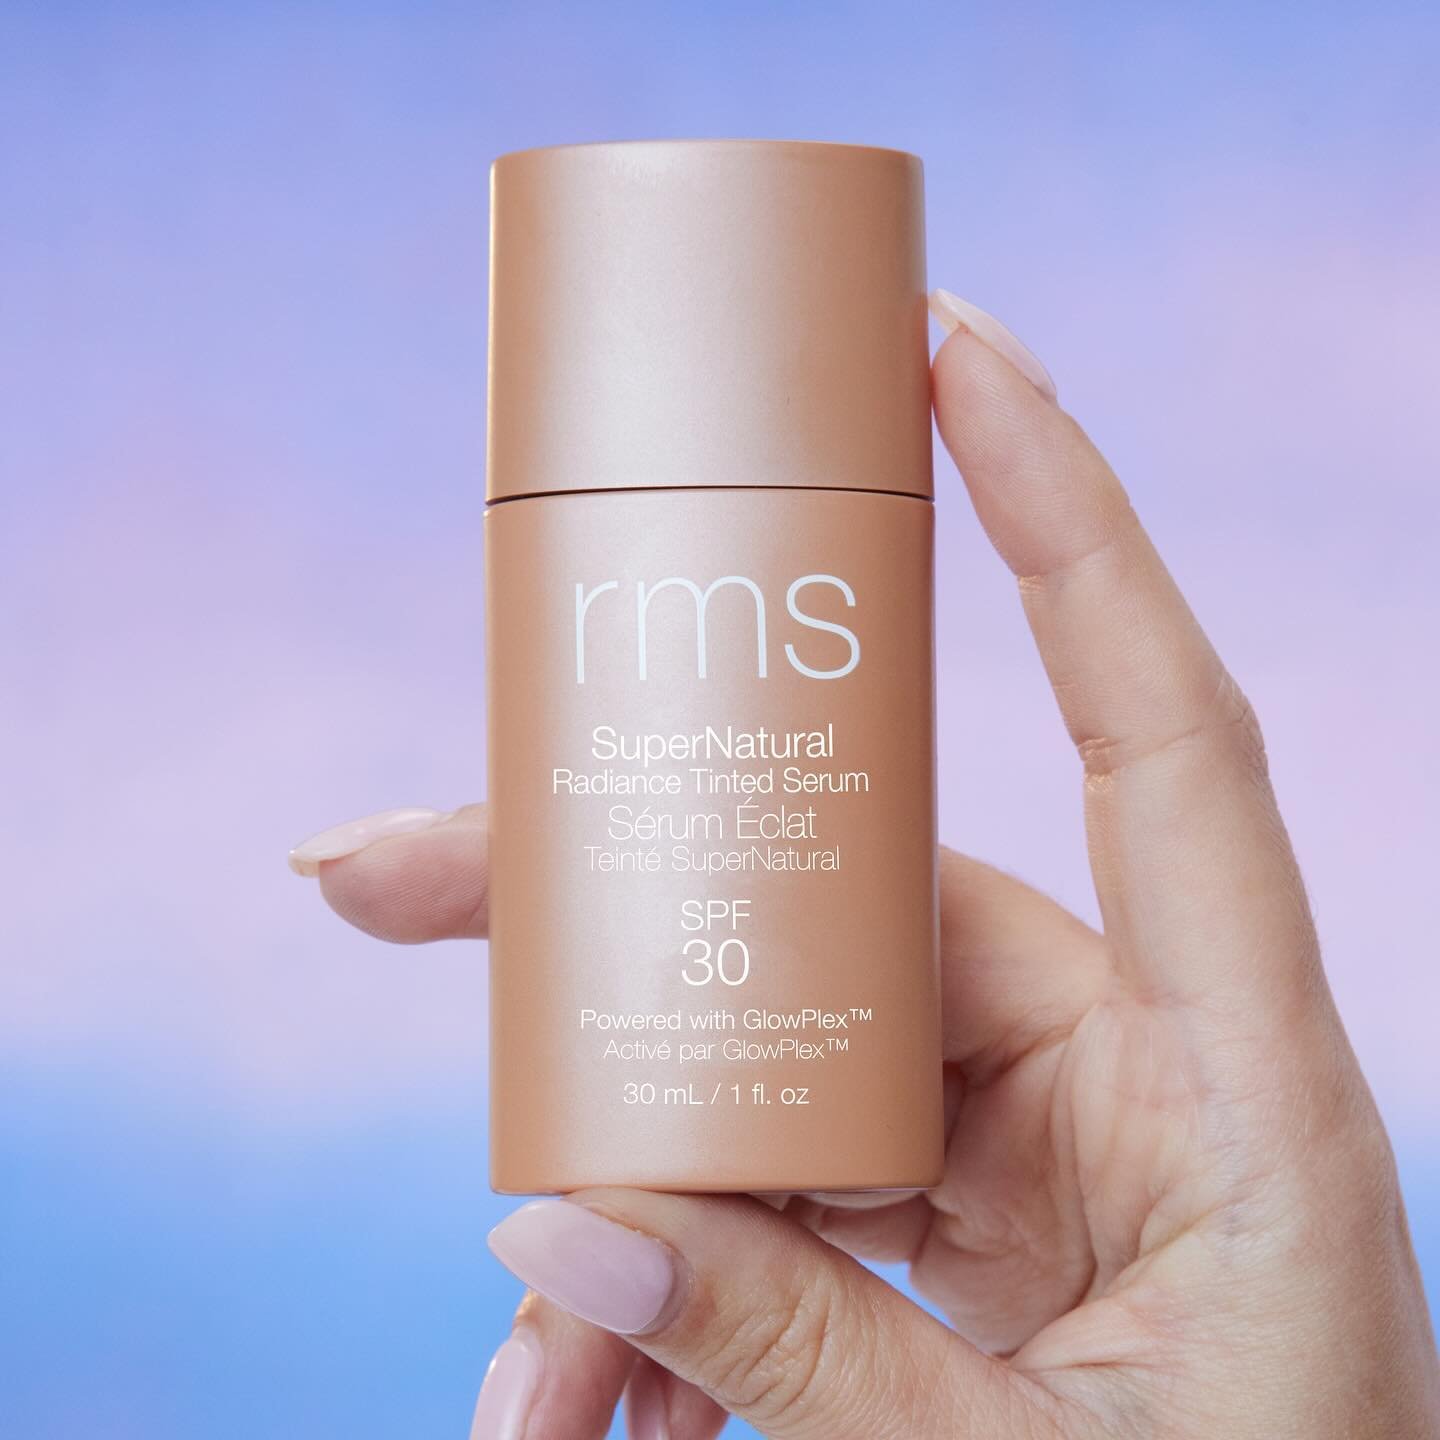 Highlighting National Sun Awareness Week with RMS Beauty &amp; Sol de Janeiro ⛱️

Formulated by the experts at @rmsbeauty, the SuperNatural Radiance Tinted Serum with SPF 30 incorporates non-nano zinc oxide to shield the skin against damaging sun ray